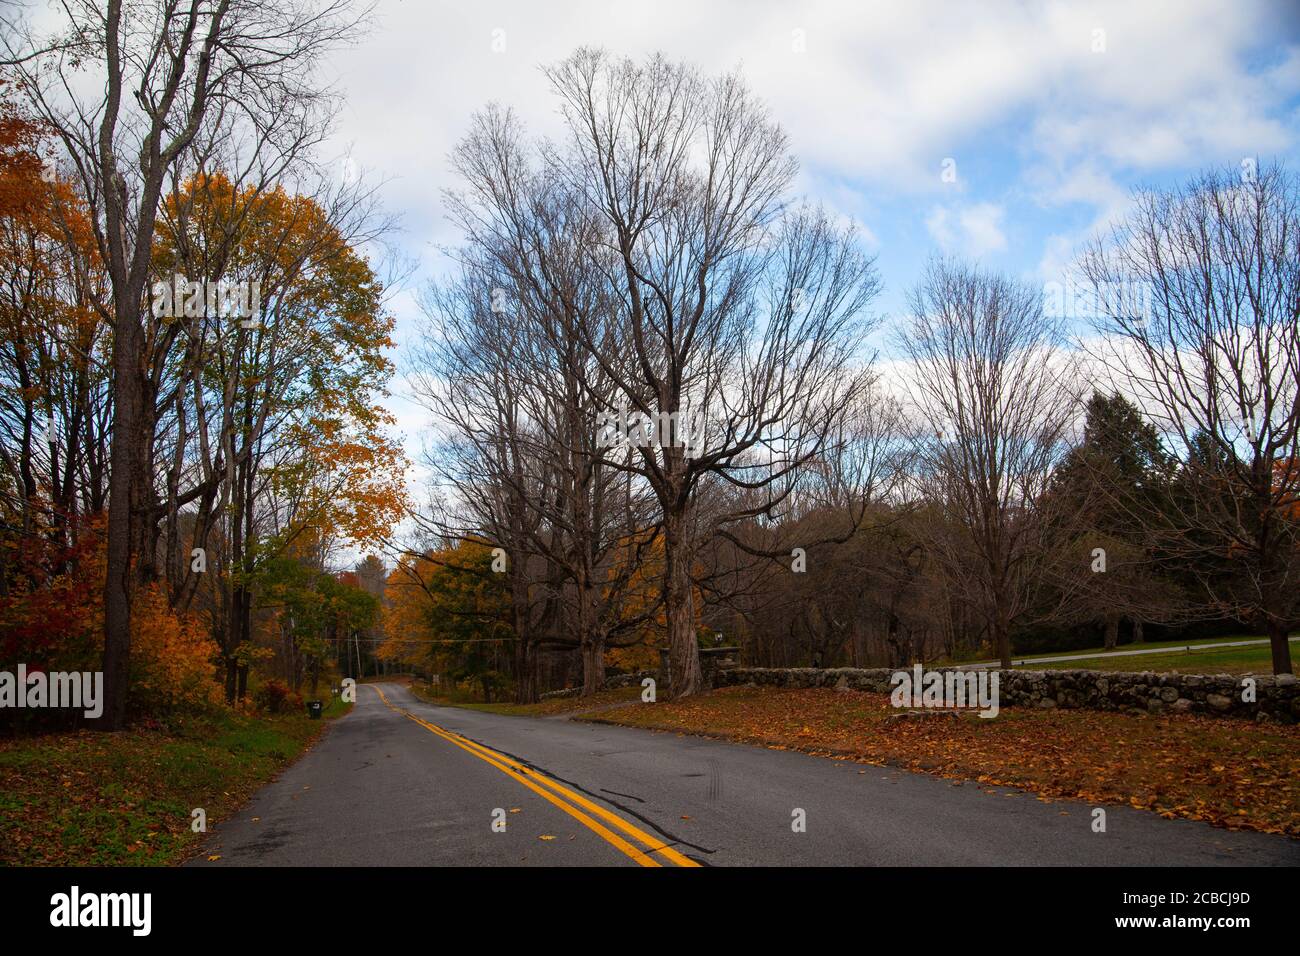 Trees with yellow and orange foliage, trees with no leaves, and grey road in Litchfield county, Connecticut, USA Stock Photo